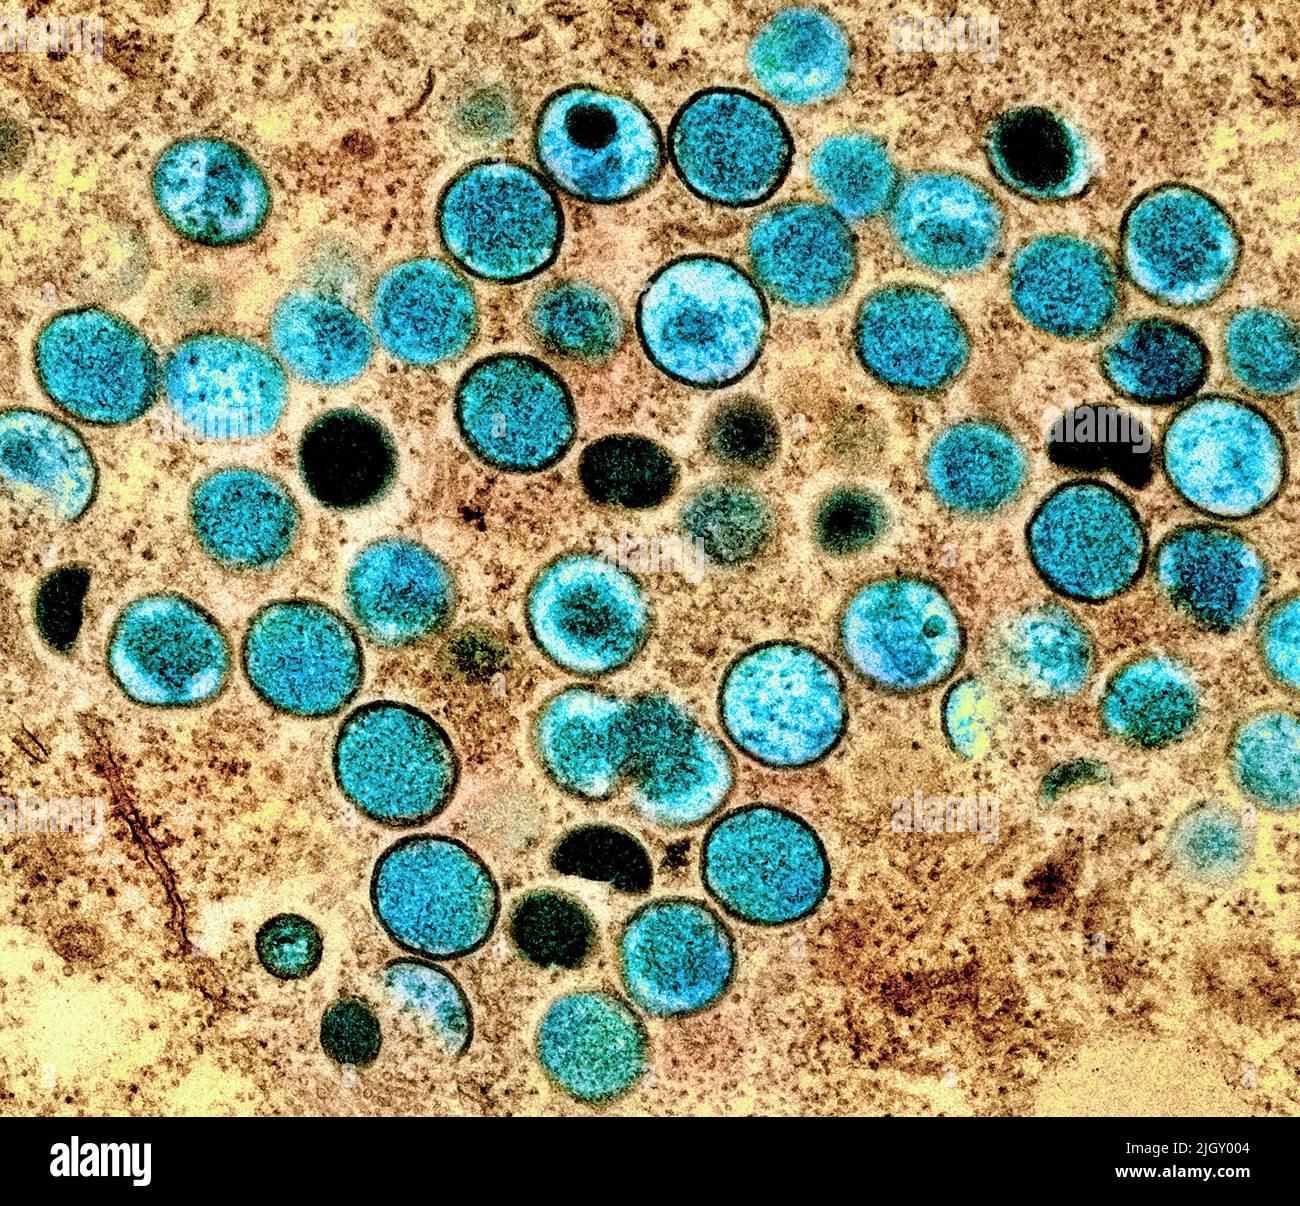 Monkeypox. Colorized transmission electron micrograph of mature extracellular Nipah Virus particles (red) near the periphery of an infected VERO cell (blue and green). Image captured at the NIAID Integrated Research Facility in Fort Detrick, Maryland. Credit NIAID Monkeypox is an infectious viral disease that can occur in humans and some other animals.Symptoms include fever, swollen lymph nodes, and a rash that forms blisters and then crusts over. The time from exposure to onset of symptoms ranges from 5 to 21 days. The duration of symptoms is typically 2 to 4 weeks. Stock Photo